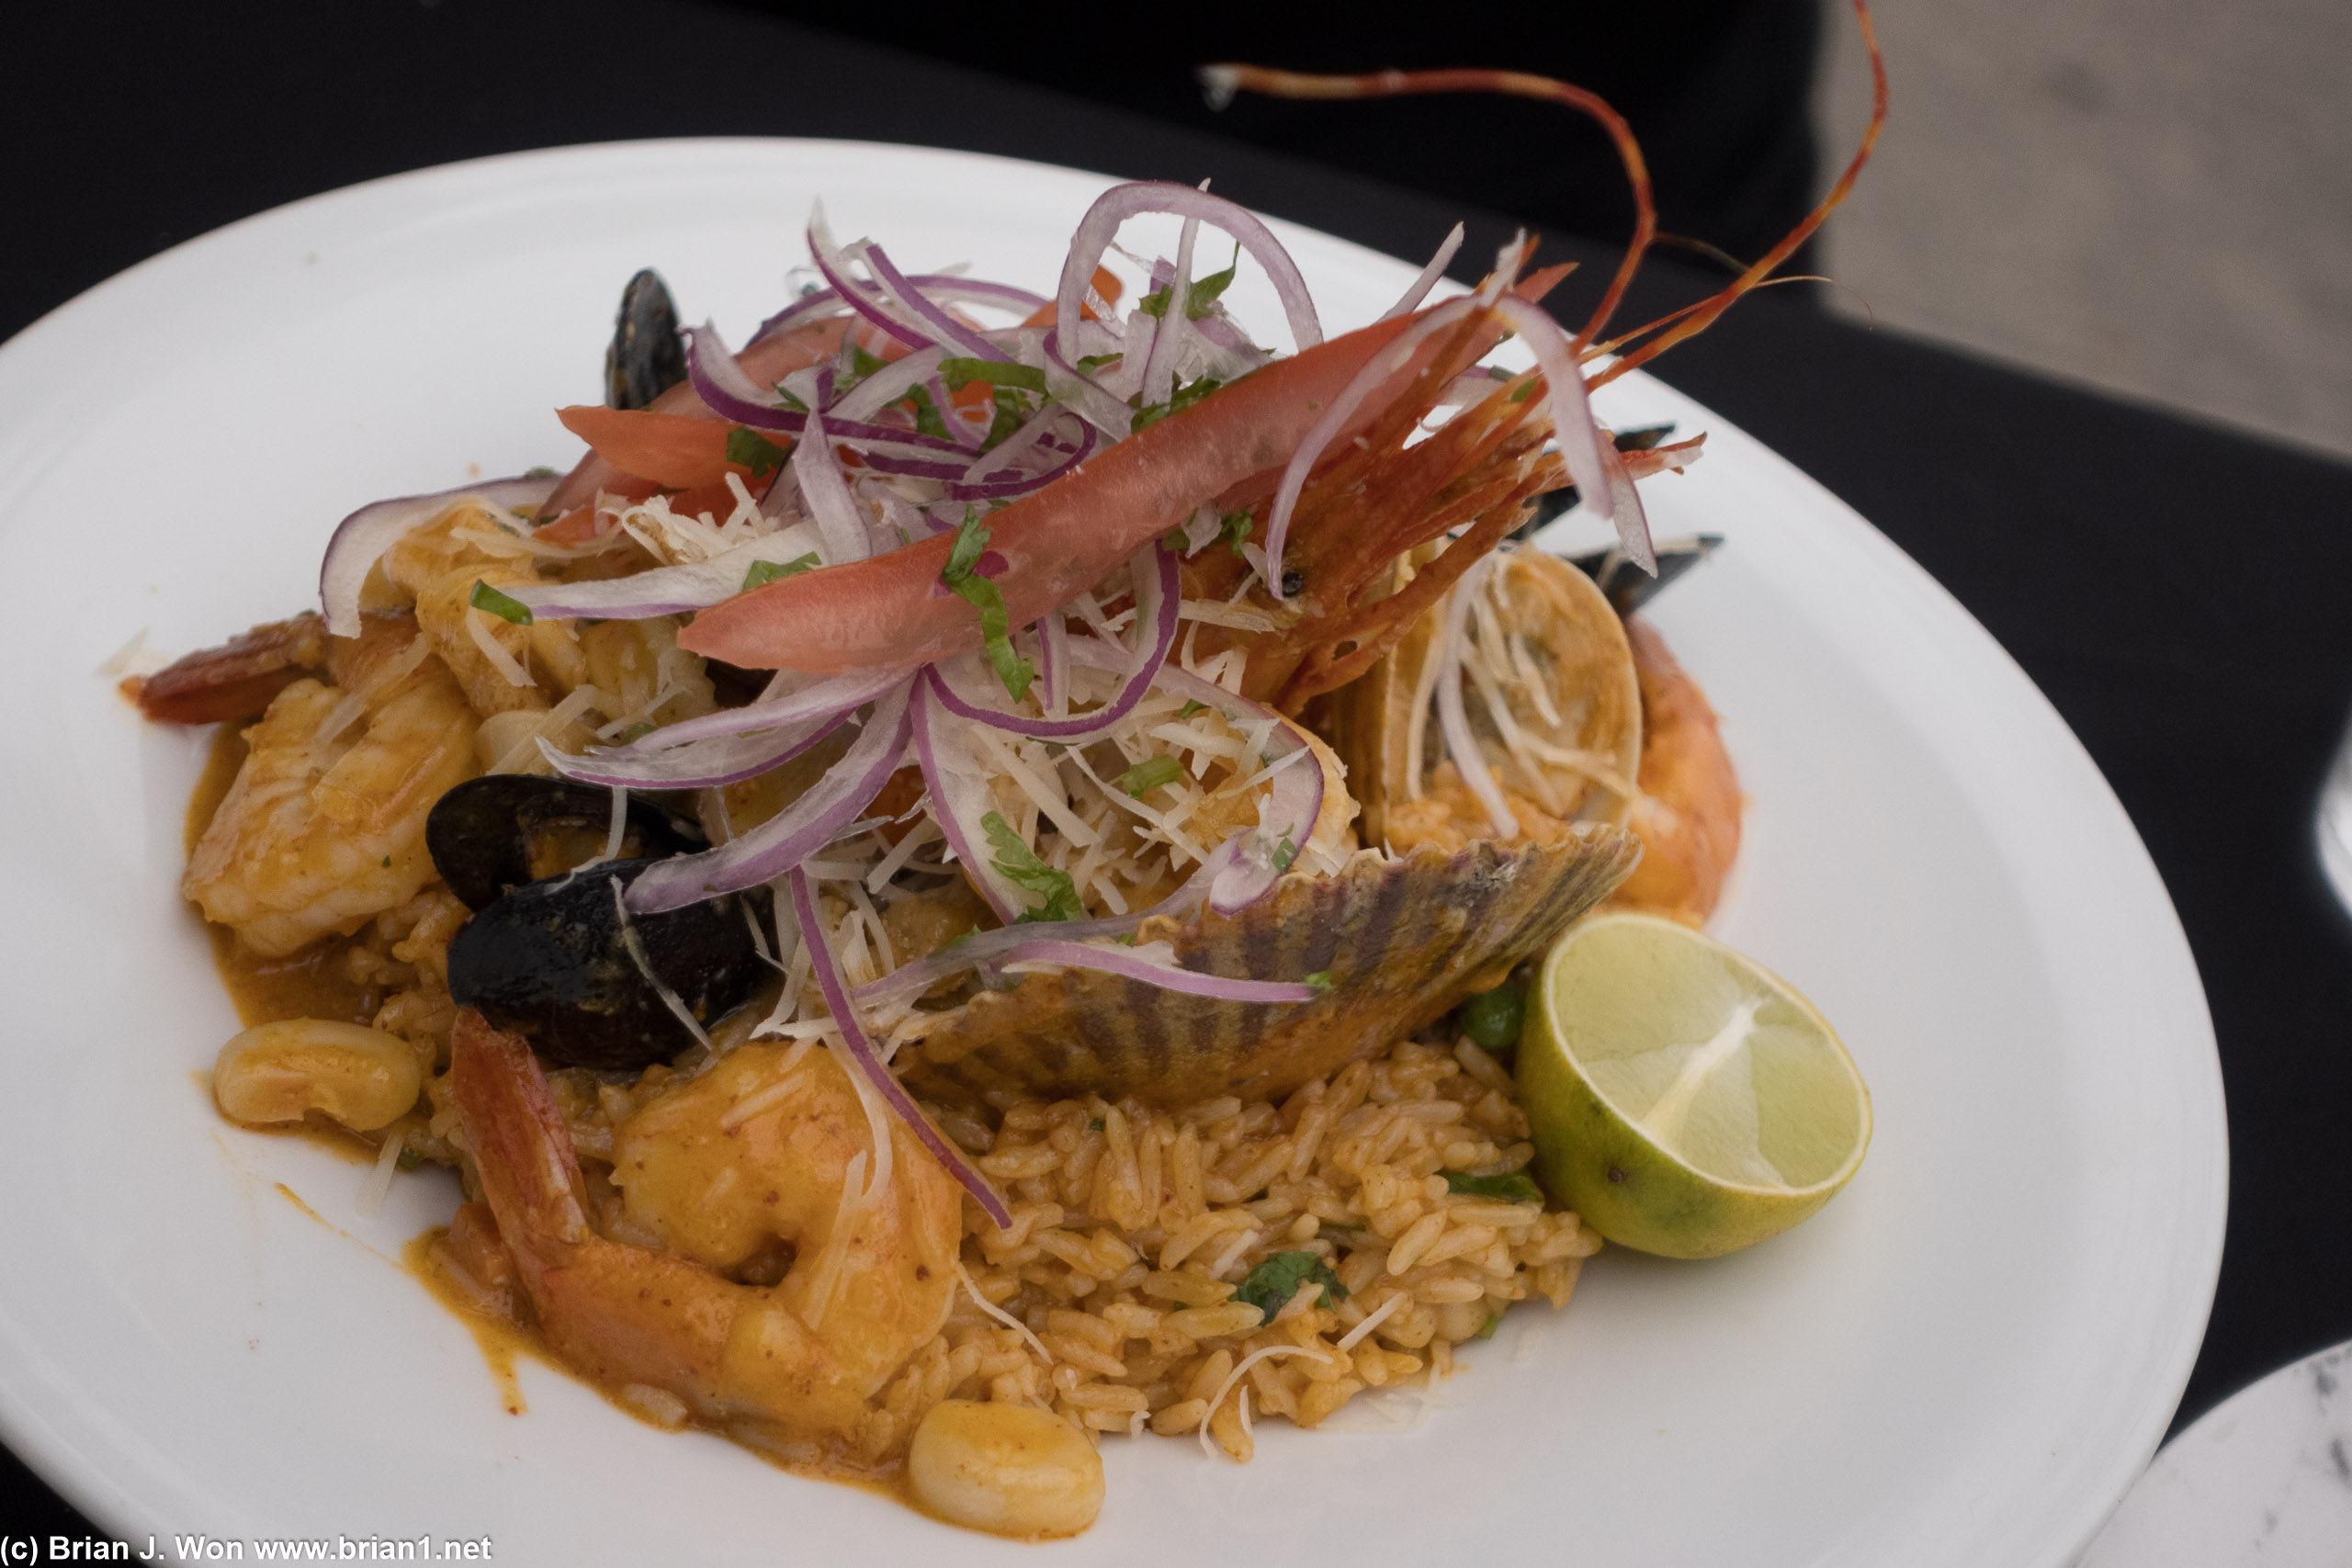 Arroz con mariscos was mushy. Overall entrees here were a miss.